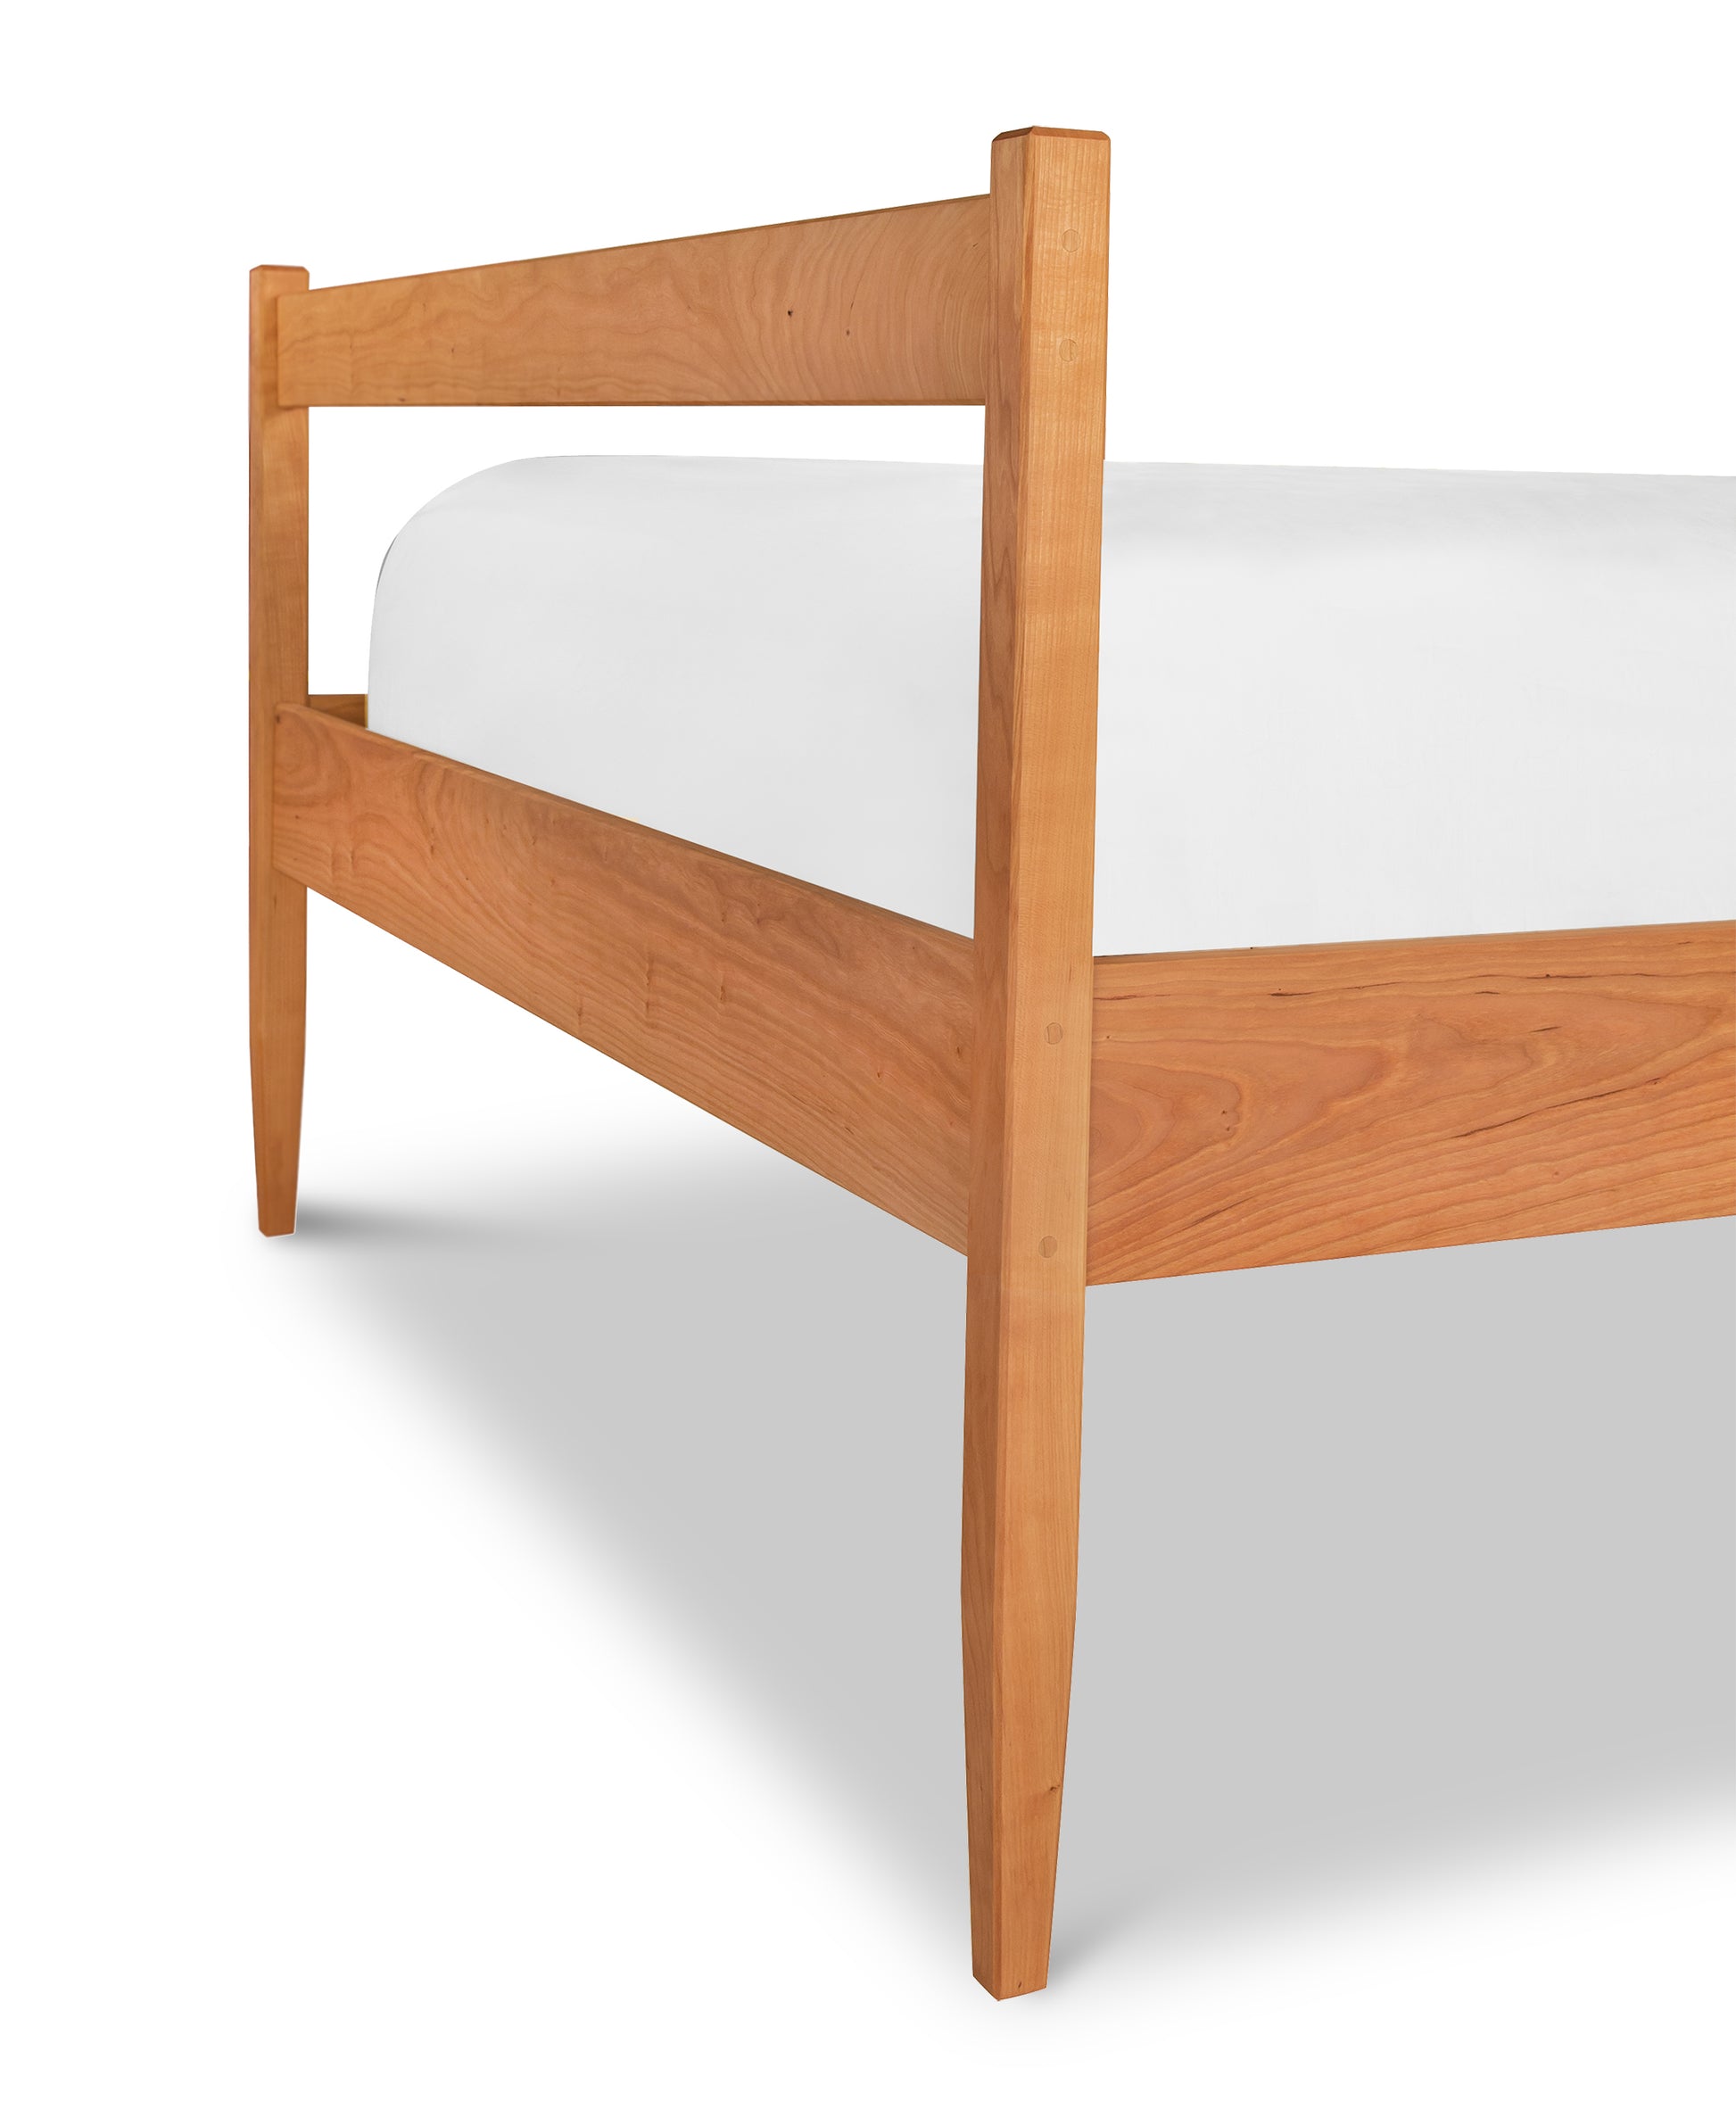 A Vermont Shaker Platform Bed, handmade by Maple Corner Woodworks furniture makers, crafted from solid hardwood and completed with a white sheet on top.